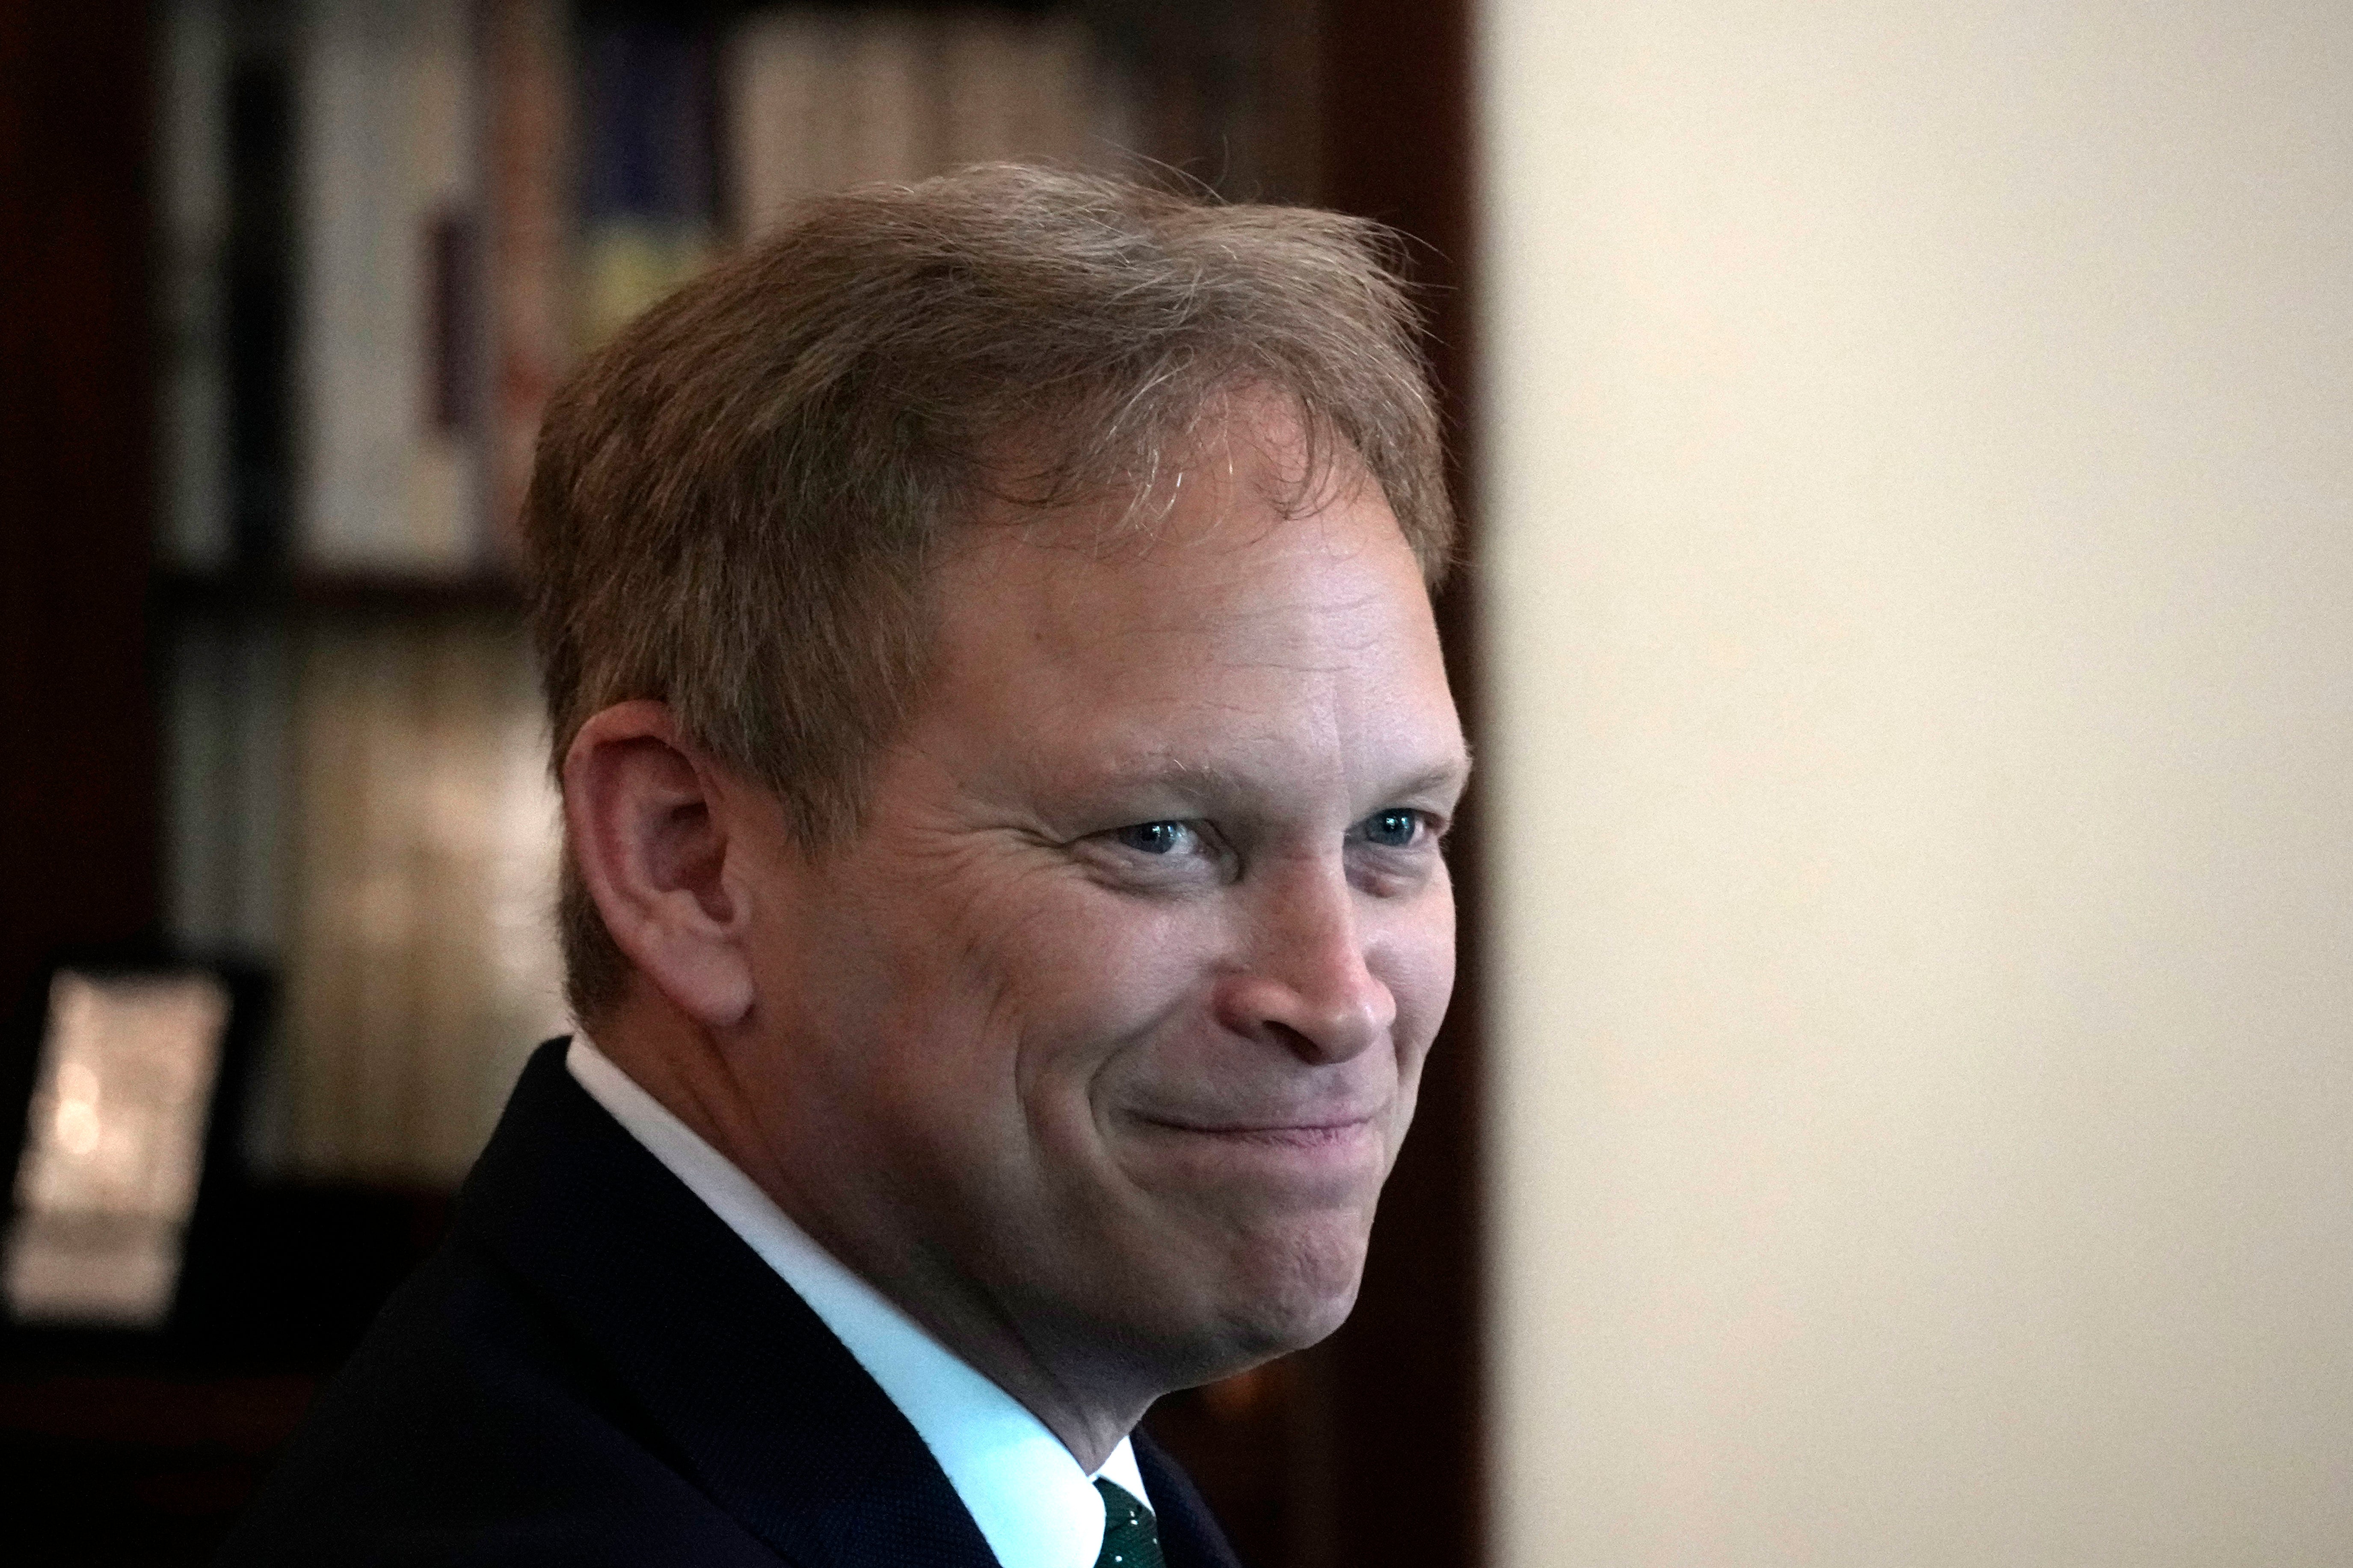 Grant Shapps defended UK military spending at time of global crises